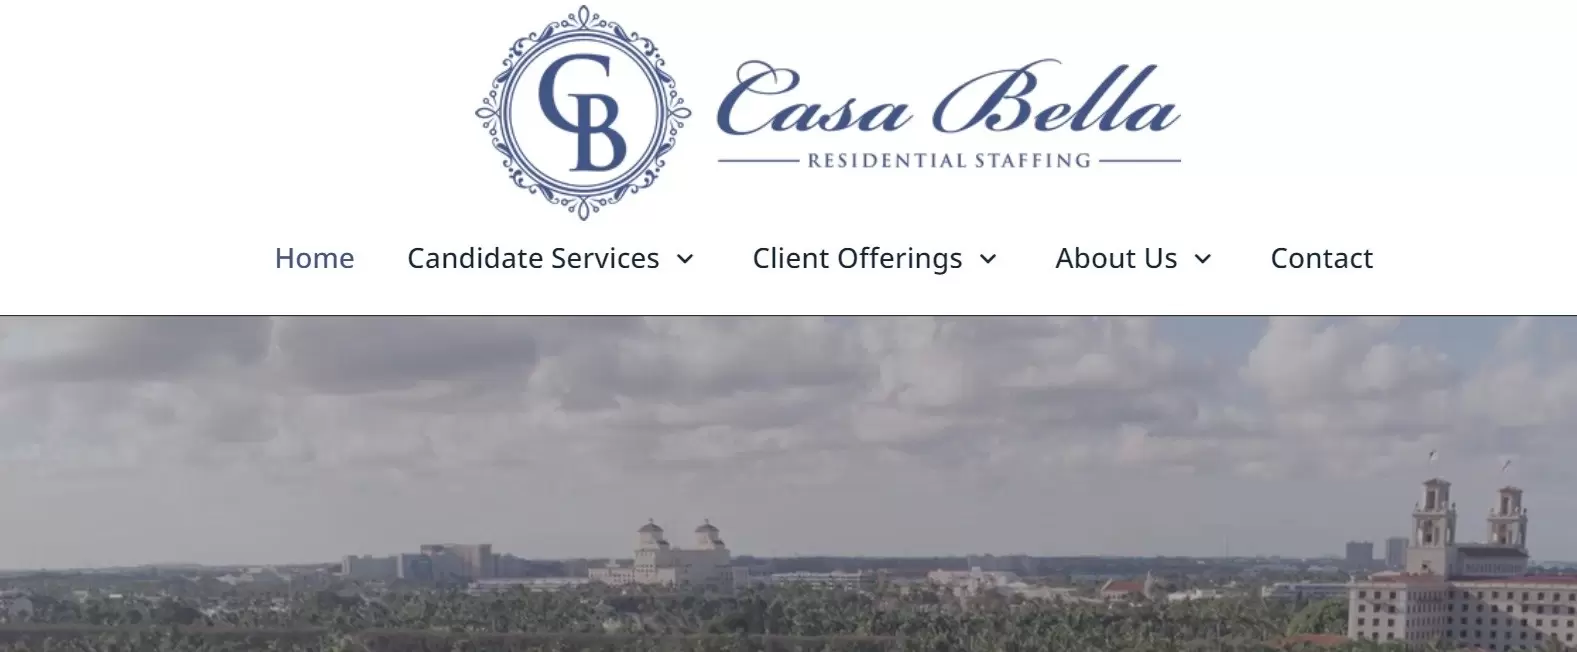 Casa Bella Residential Staffing: Company Profile & Reviews